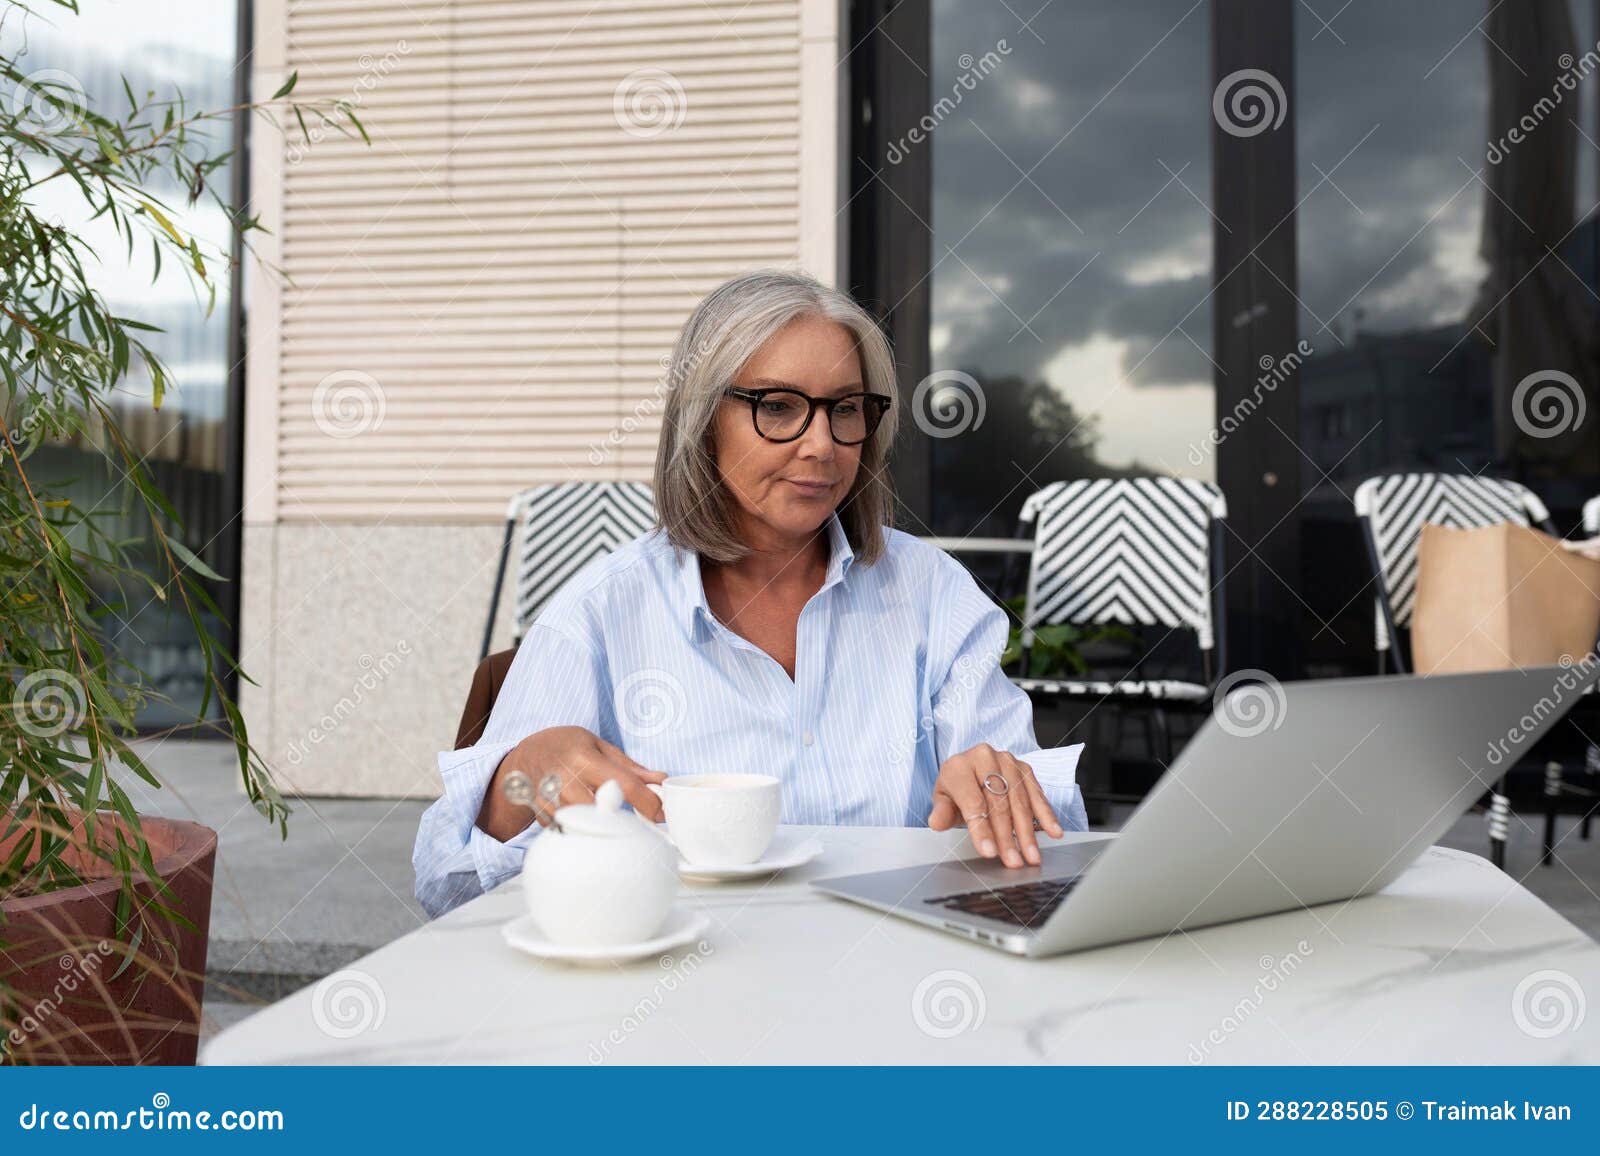 A Slender Gray Haired Woman Of Mature Years Dressed In A Light Blue